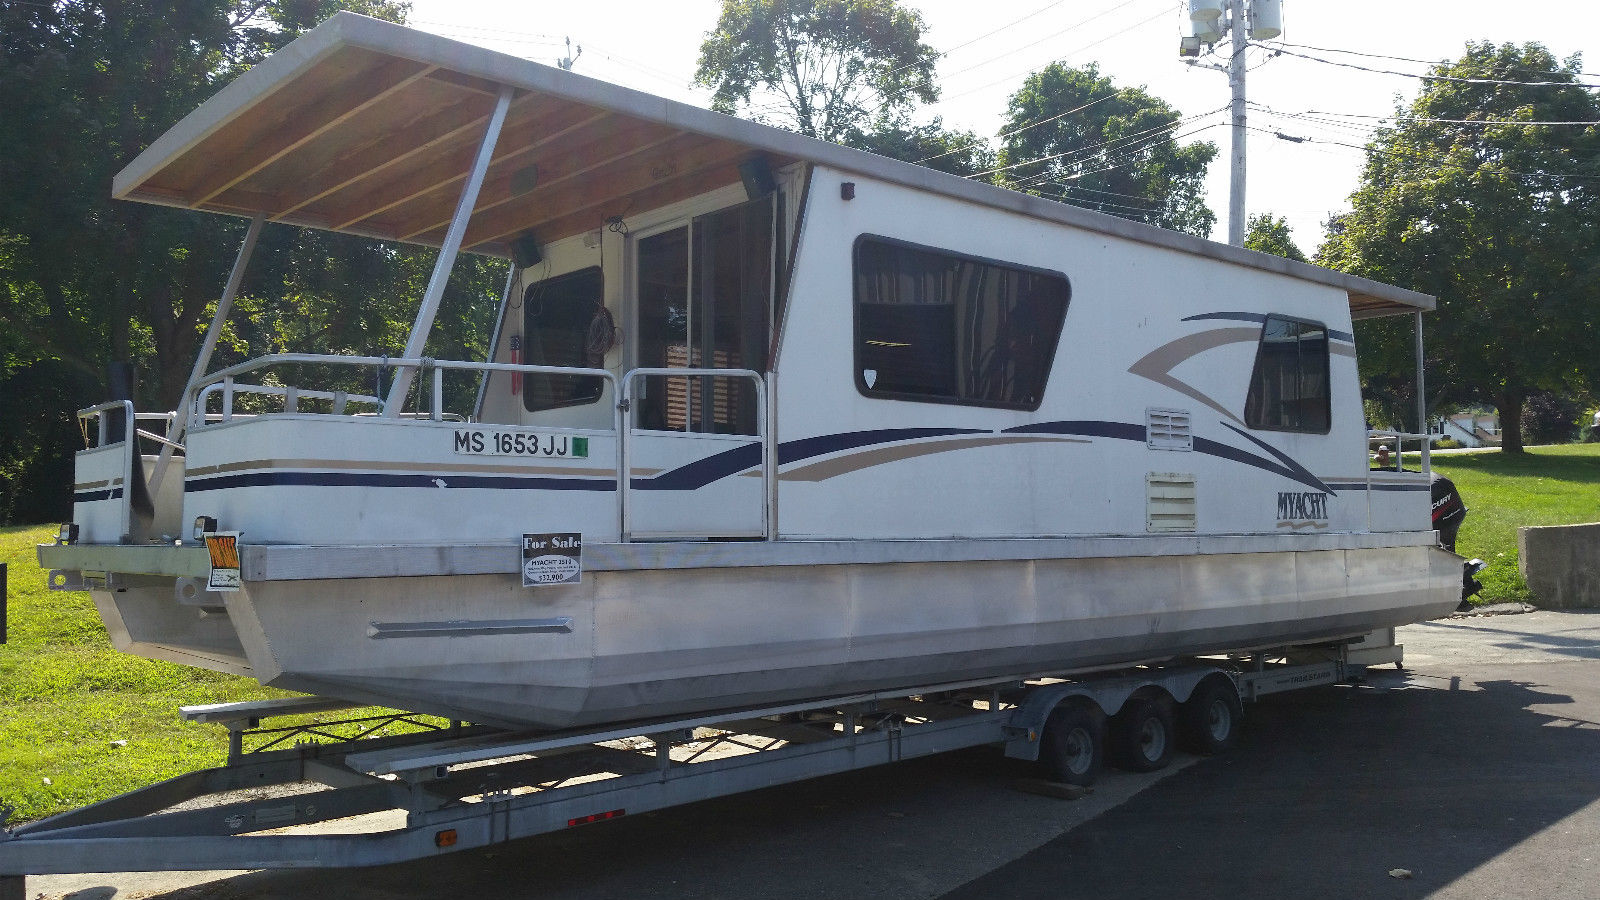 Myacht 3510 2000 for sale for $32,900 - Boats-from-USA.com